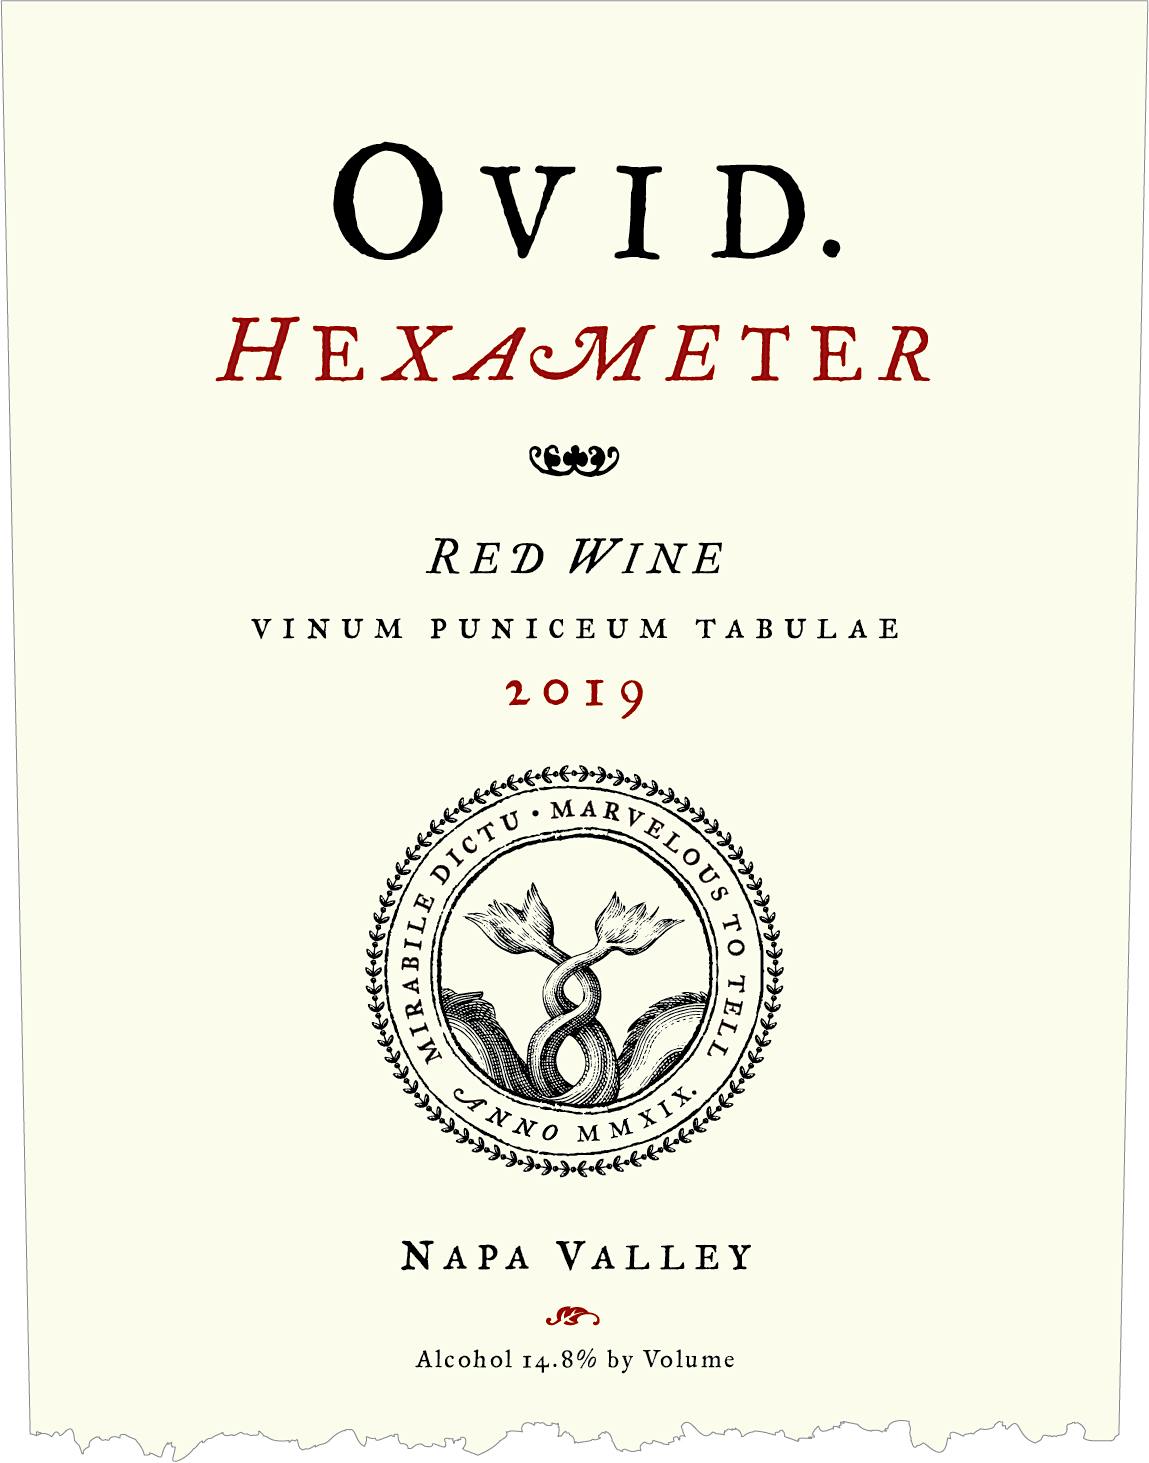 Label for Ovid